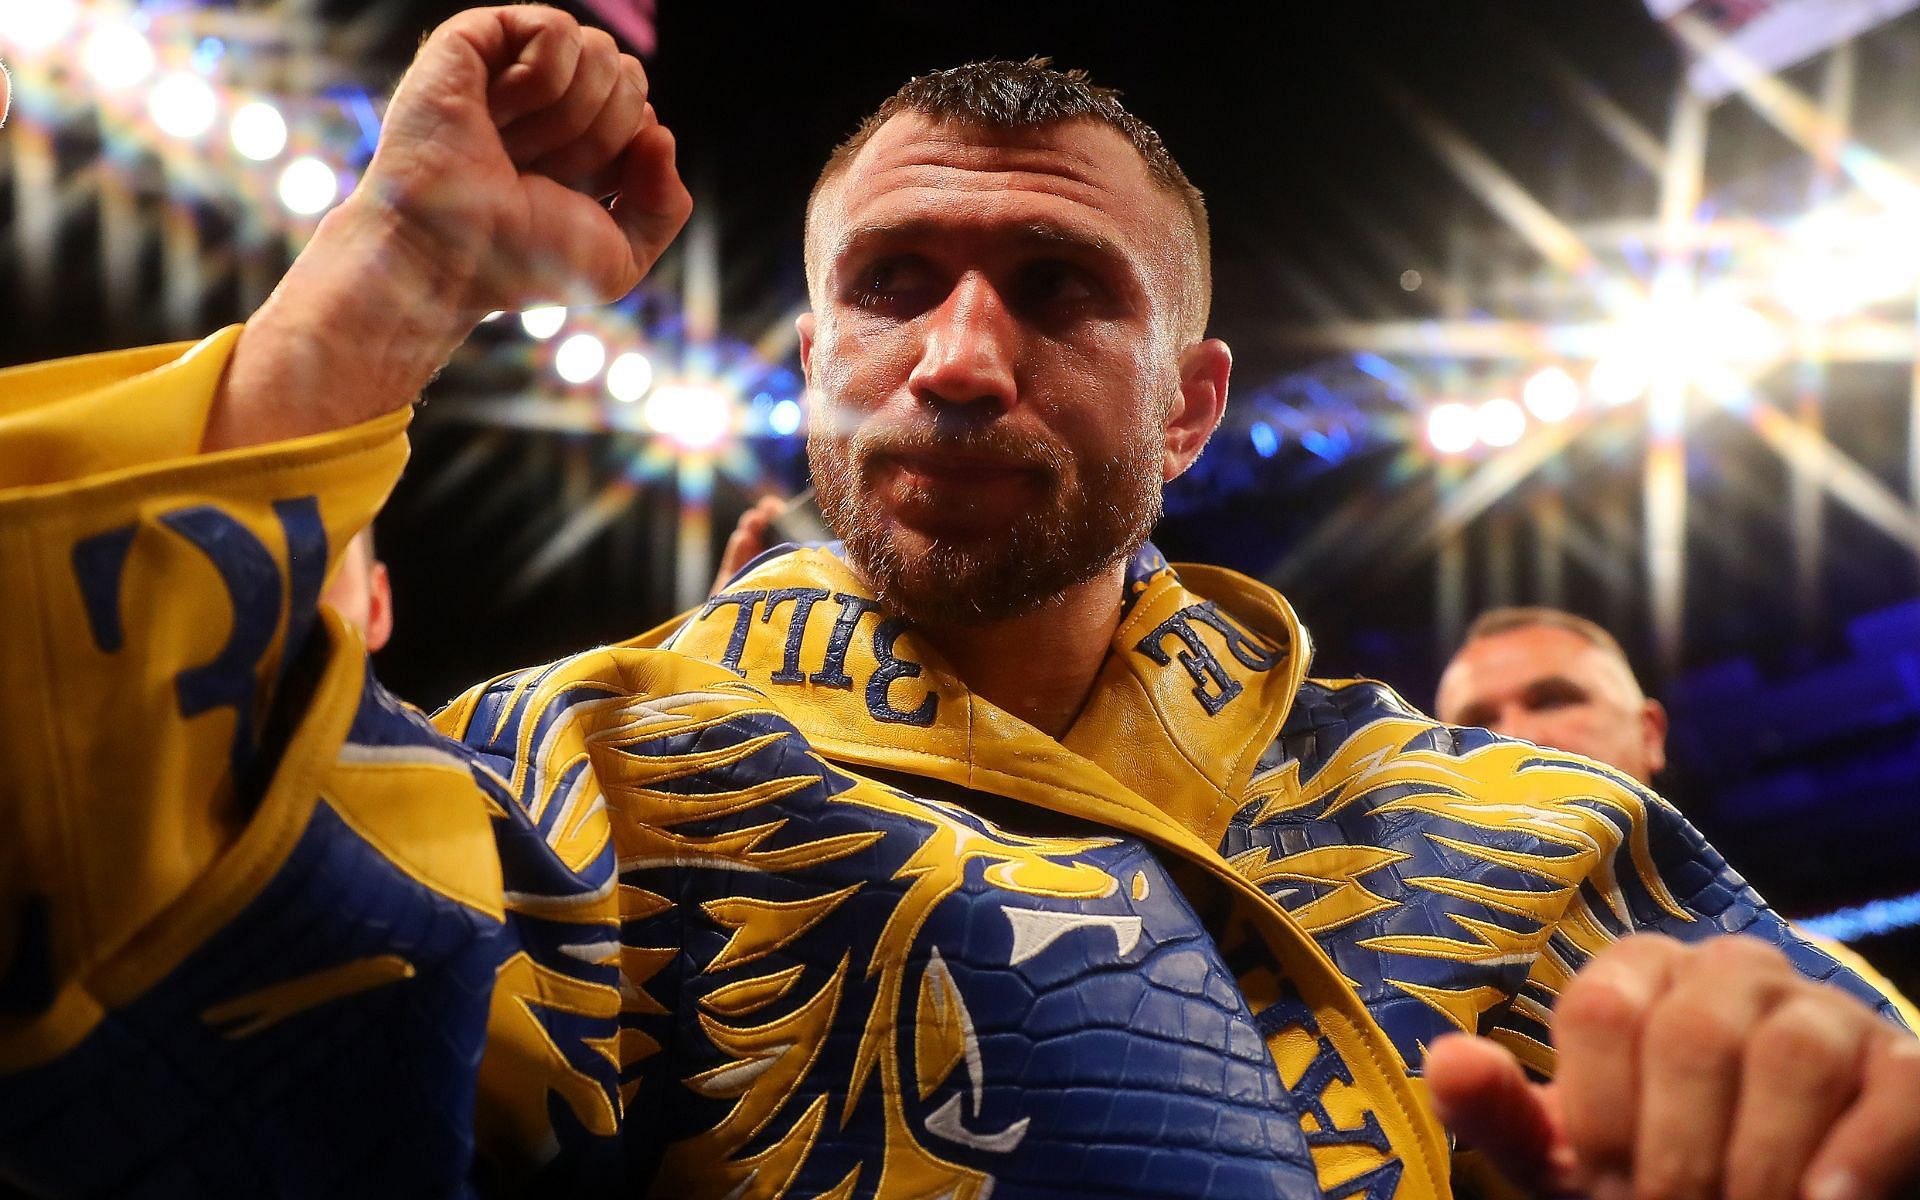 Vasiliy Lomachenko is beheld as one of the best boxers in the world [Image courtesy: Getty Images]